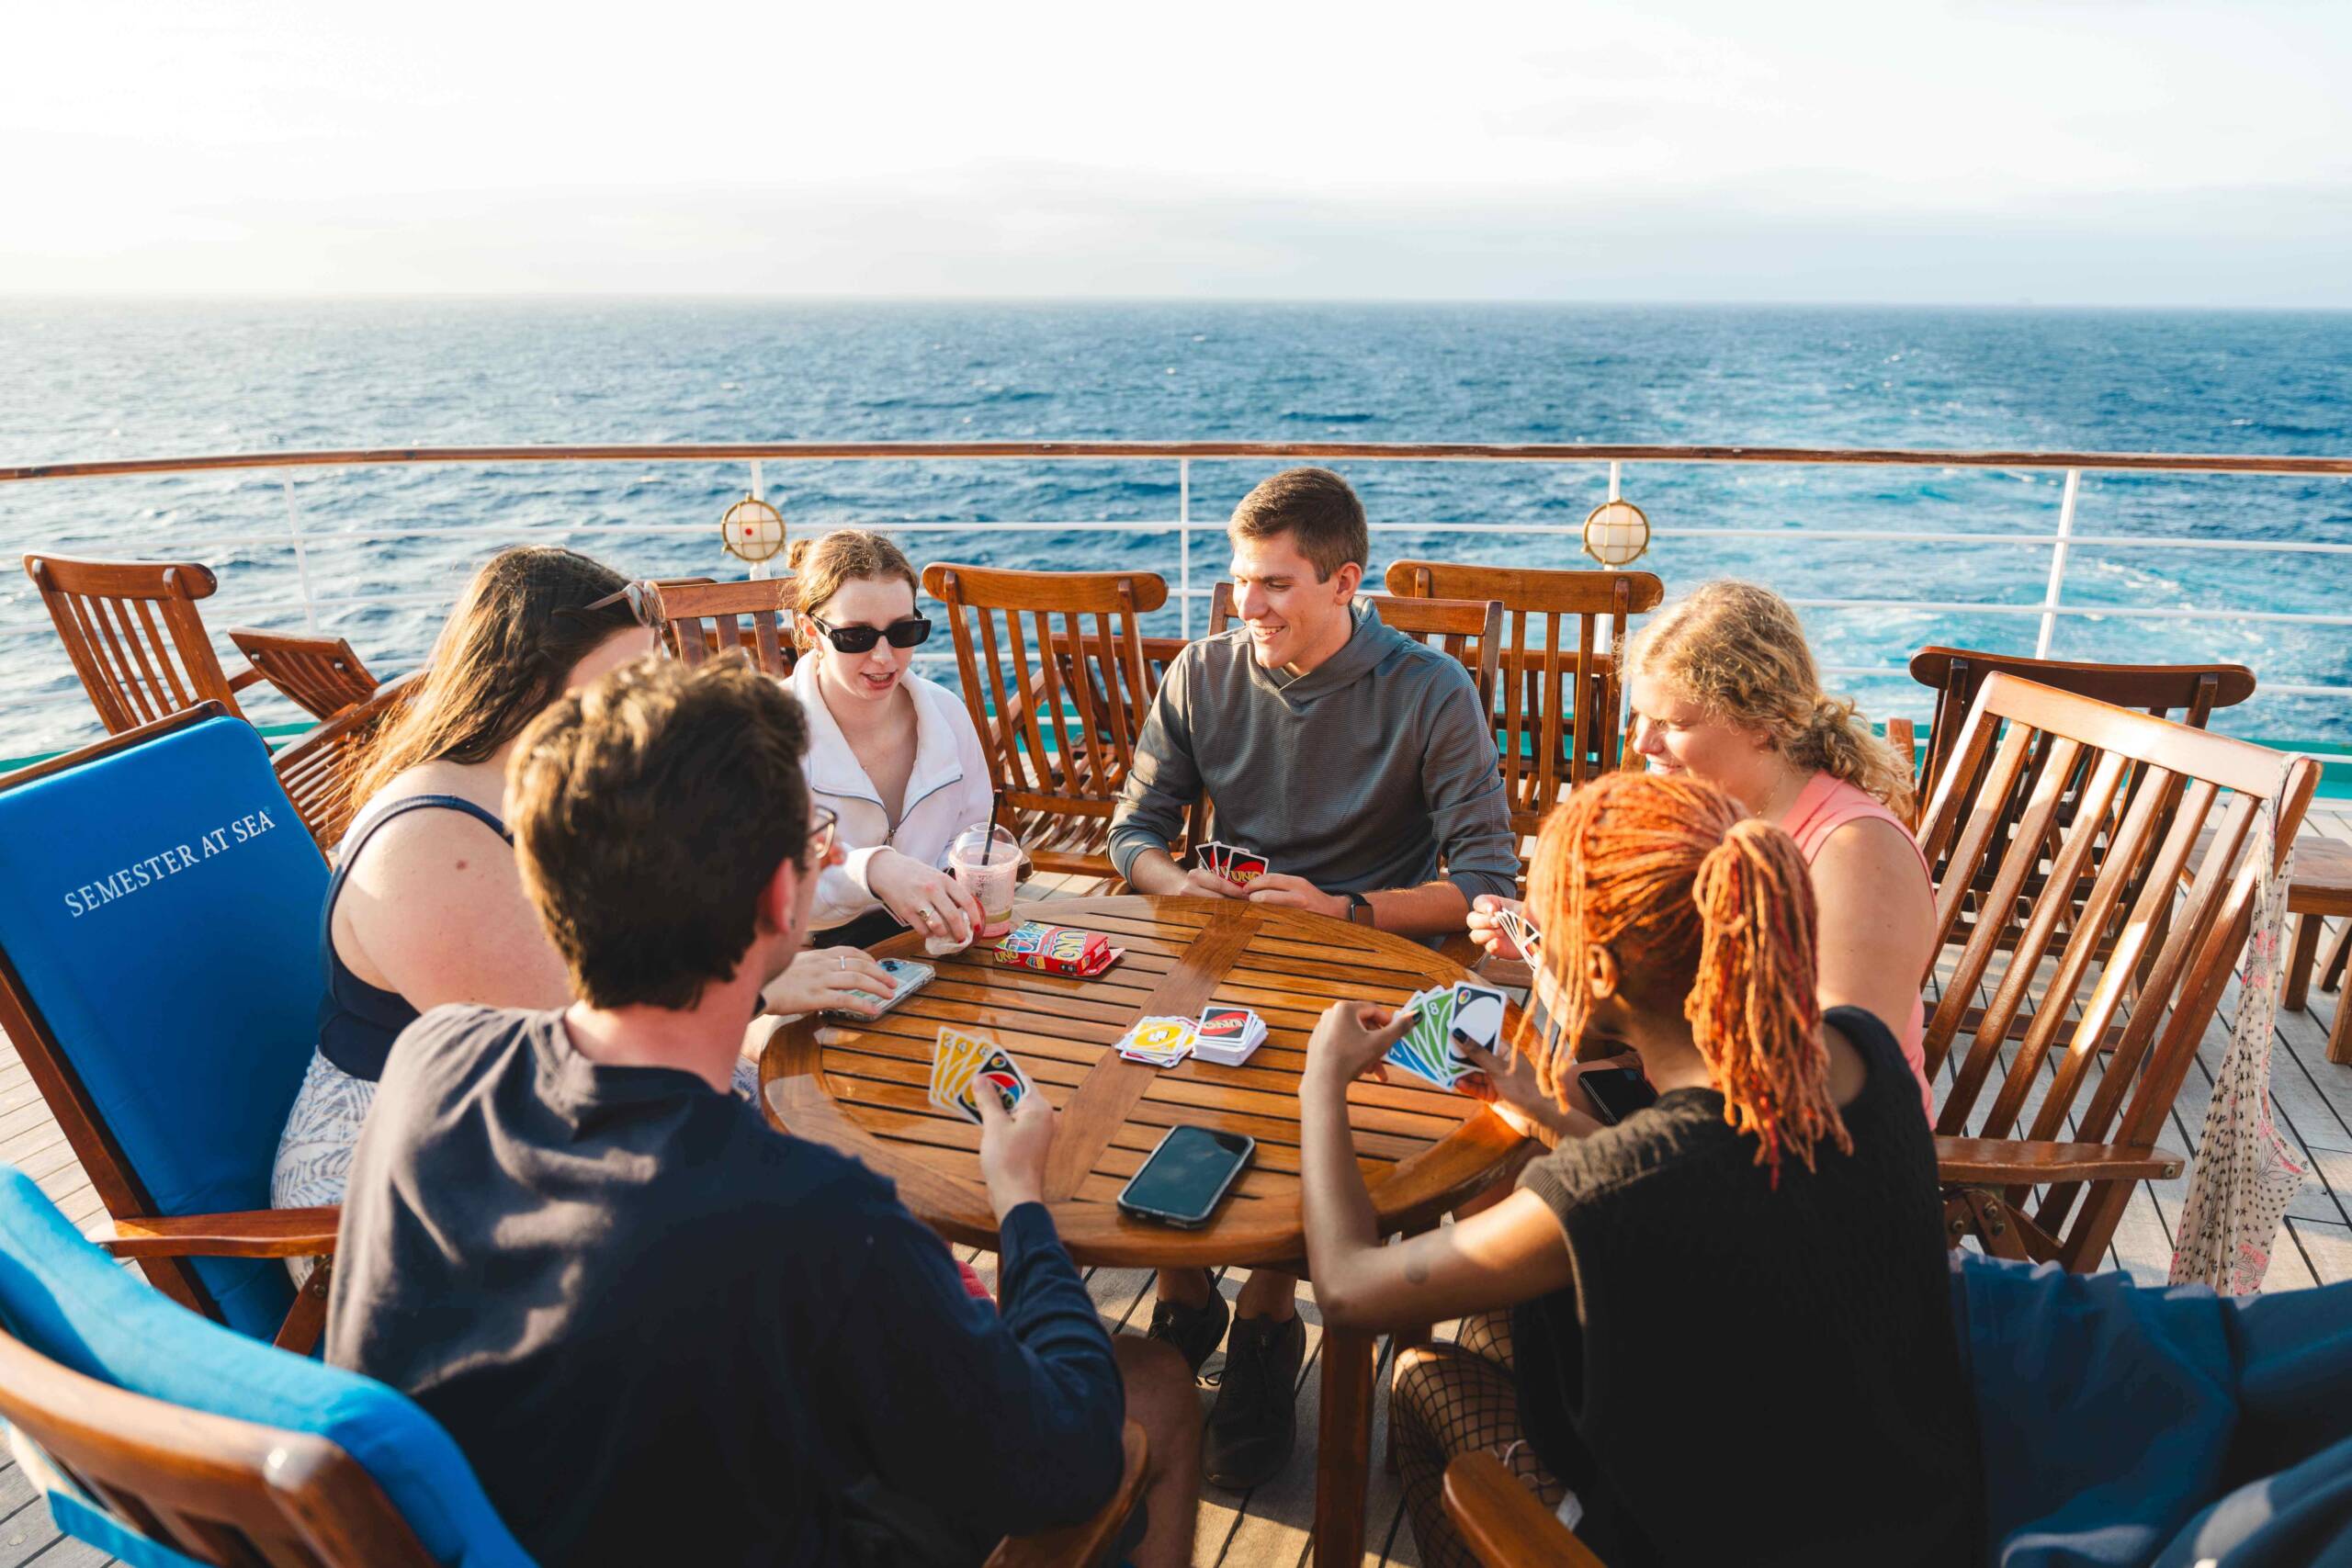 Six people sit around a wooden table on the deck of a ship, playing a card game. A wide blue ocean stretches behind them.